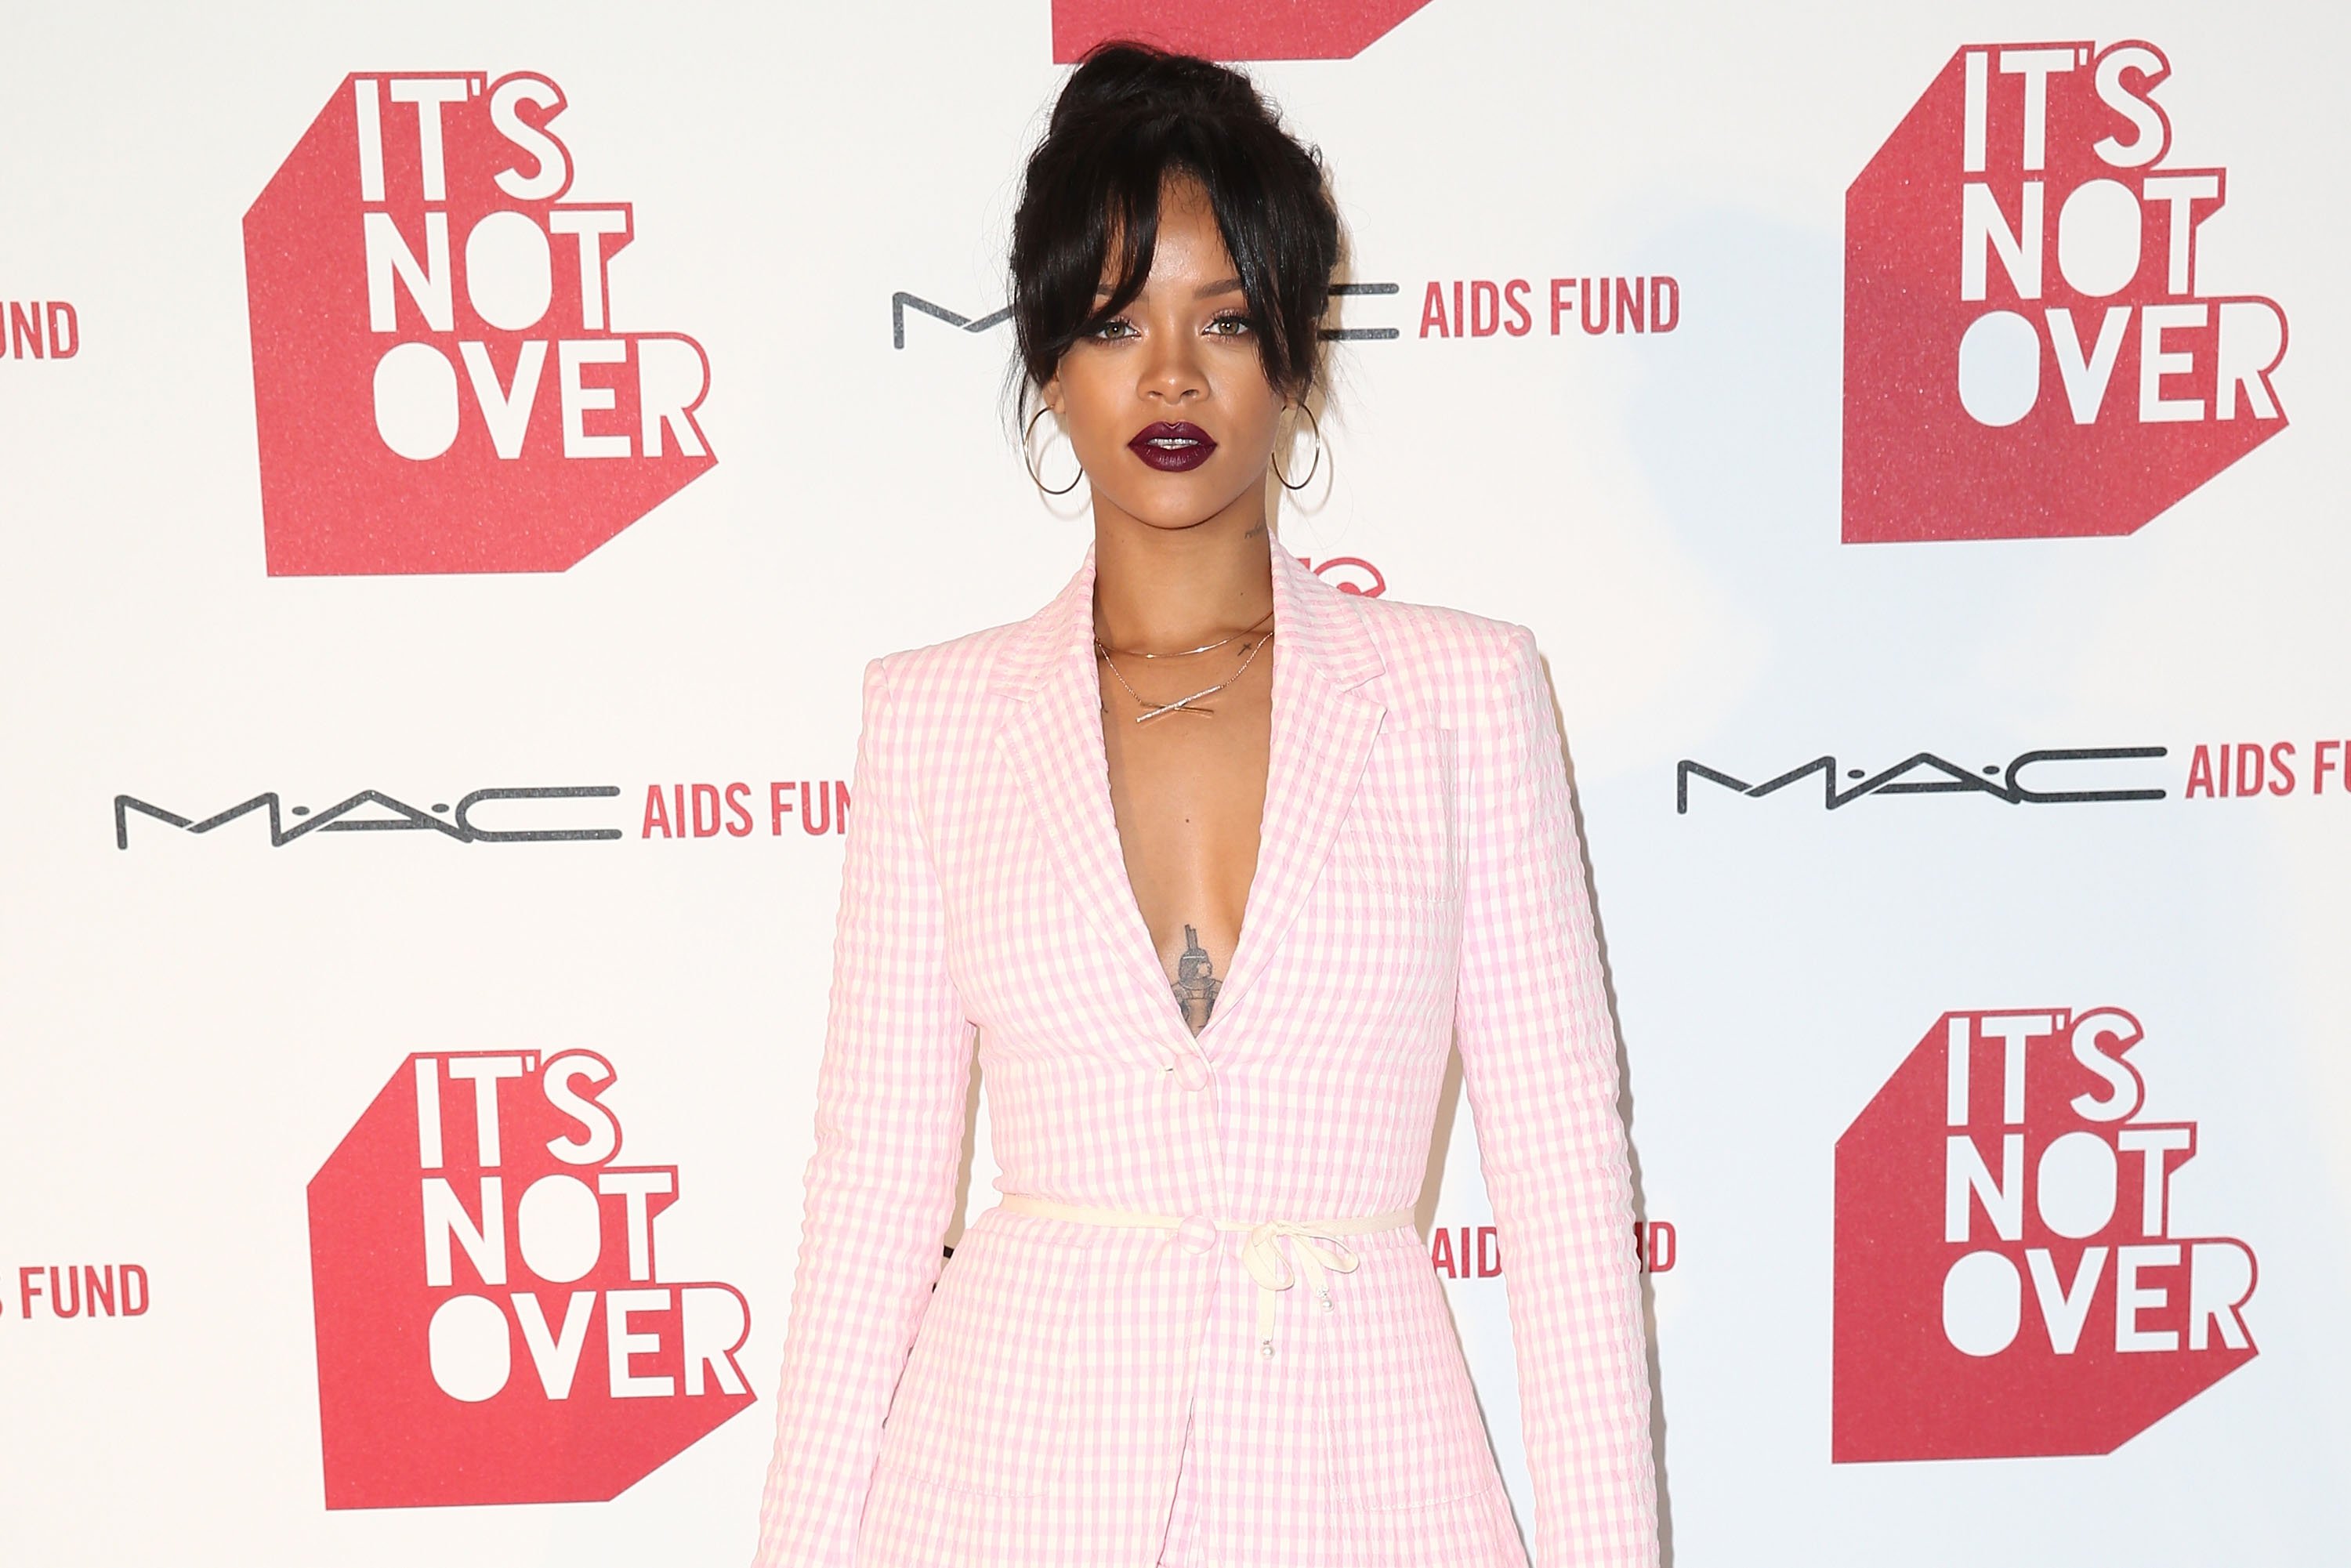 Rihanna at MAC Cosmetics And MAC AIDS Fund World Premiere Of "It's Not Over" Directed By Andrew Jenks on Nov. 18, 2014 in Los Angeles. |Photo: Getty Images